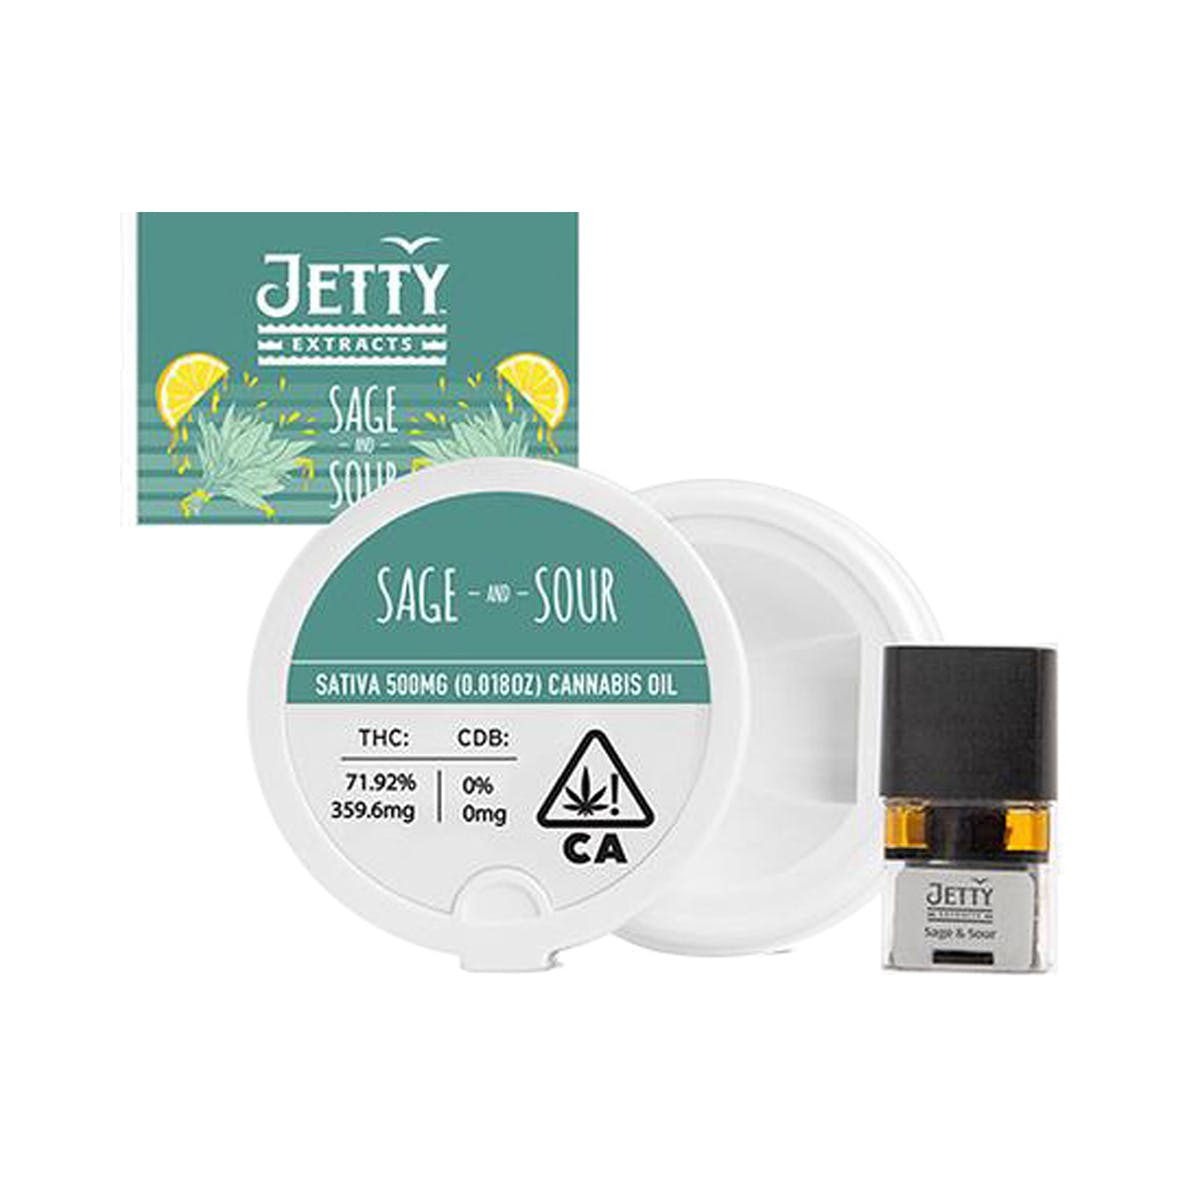 marijuana-dispensaries-cannary-west-in-los-angeles-pax-era-pod-jetty-extracts-sage-n-sour